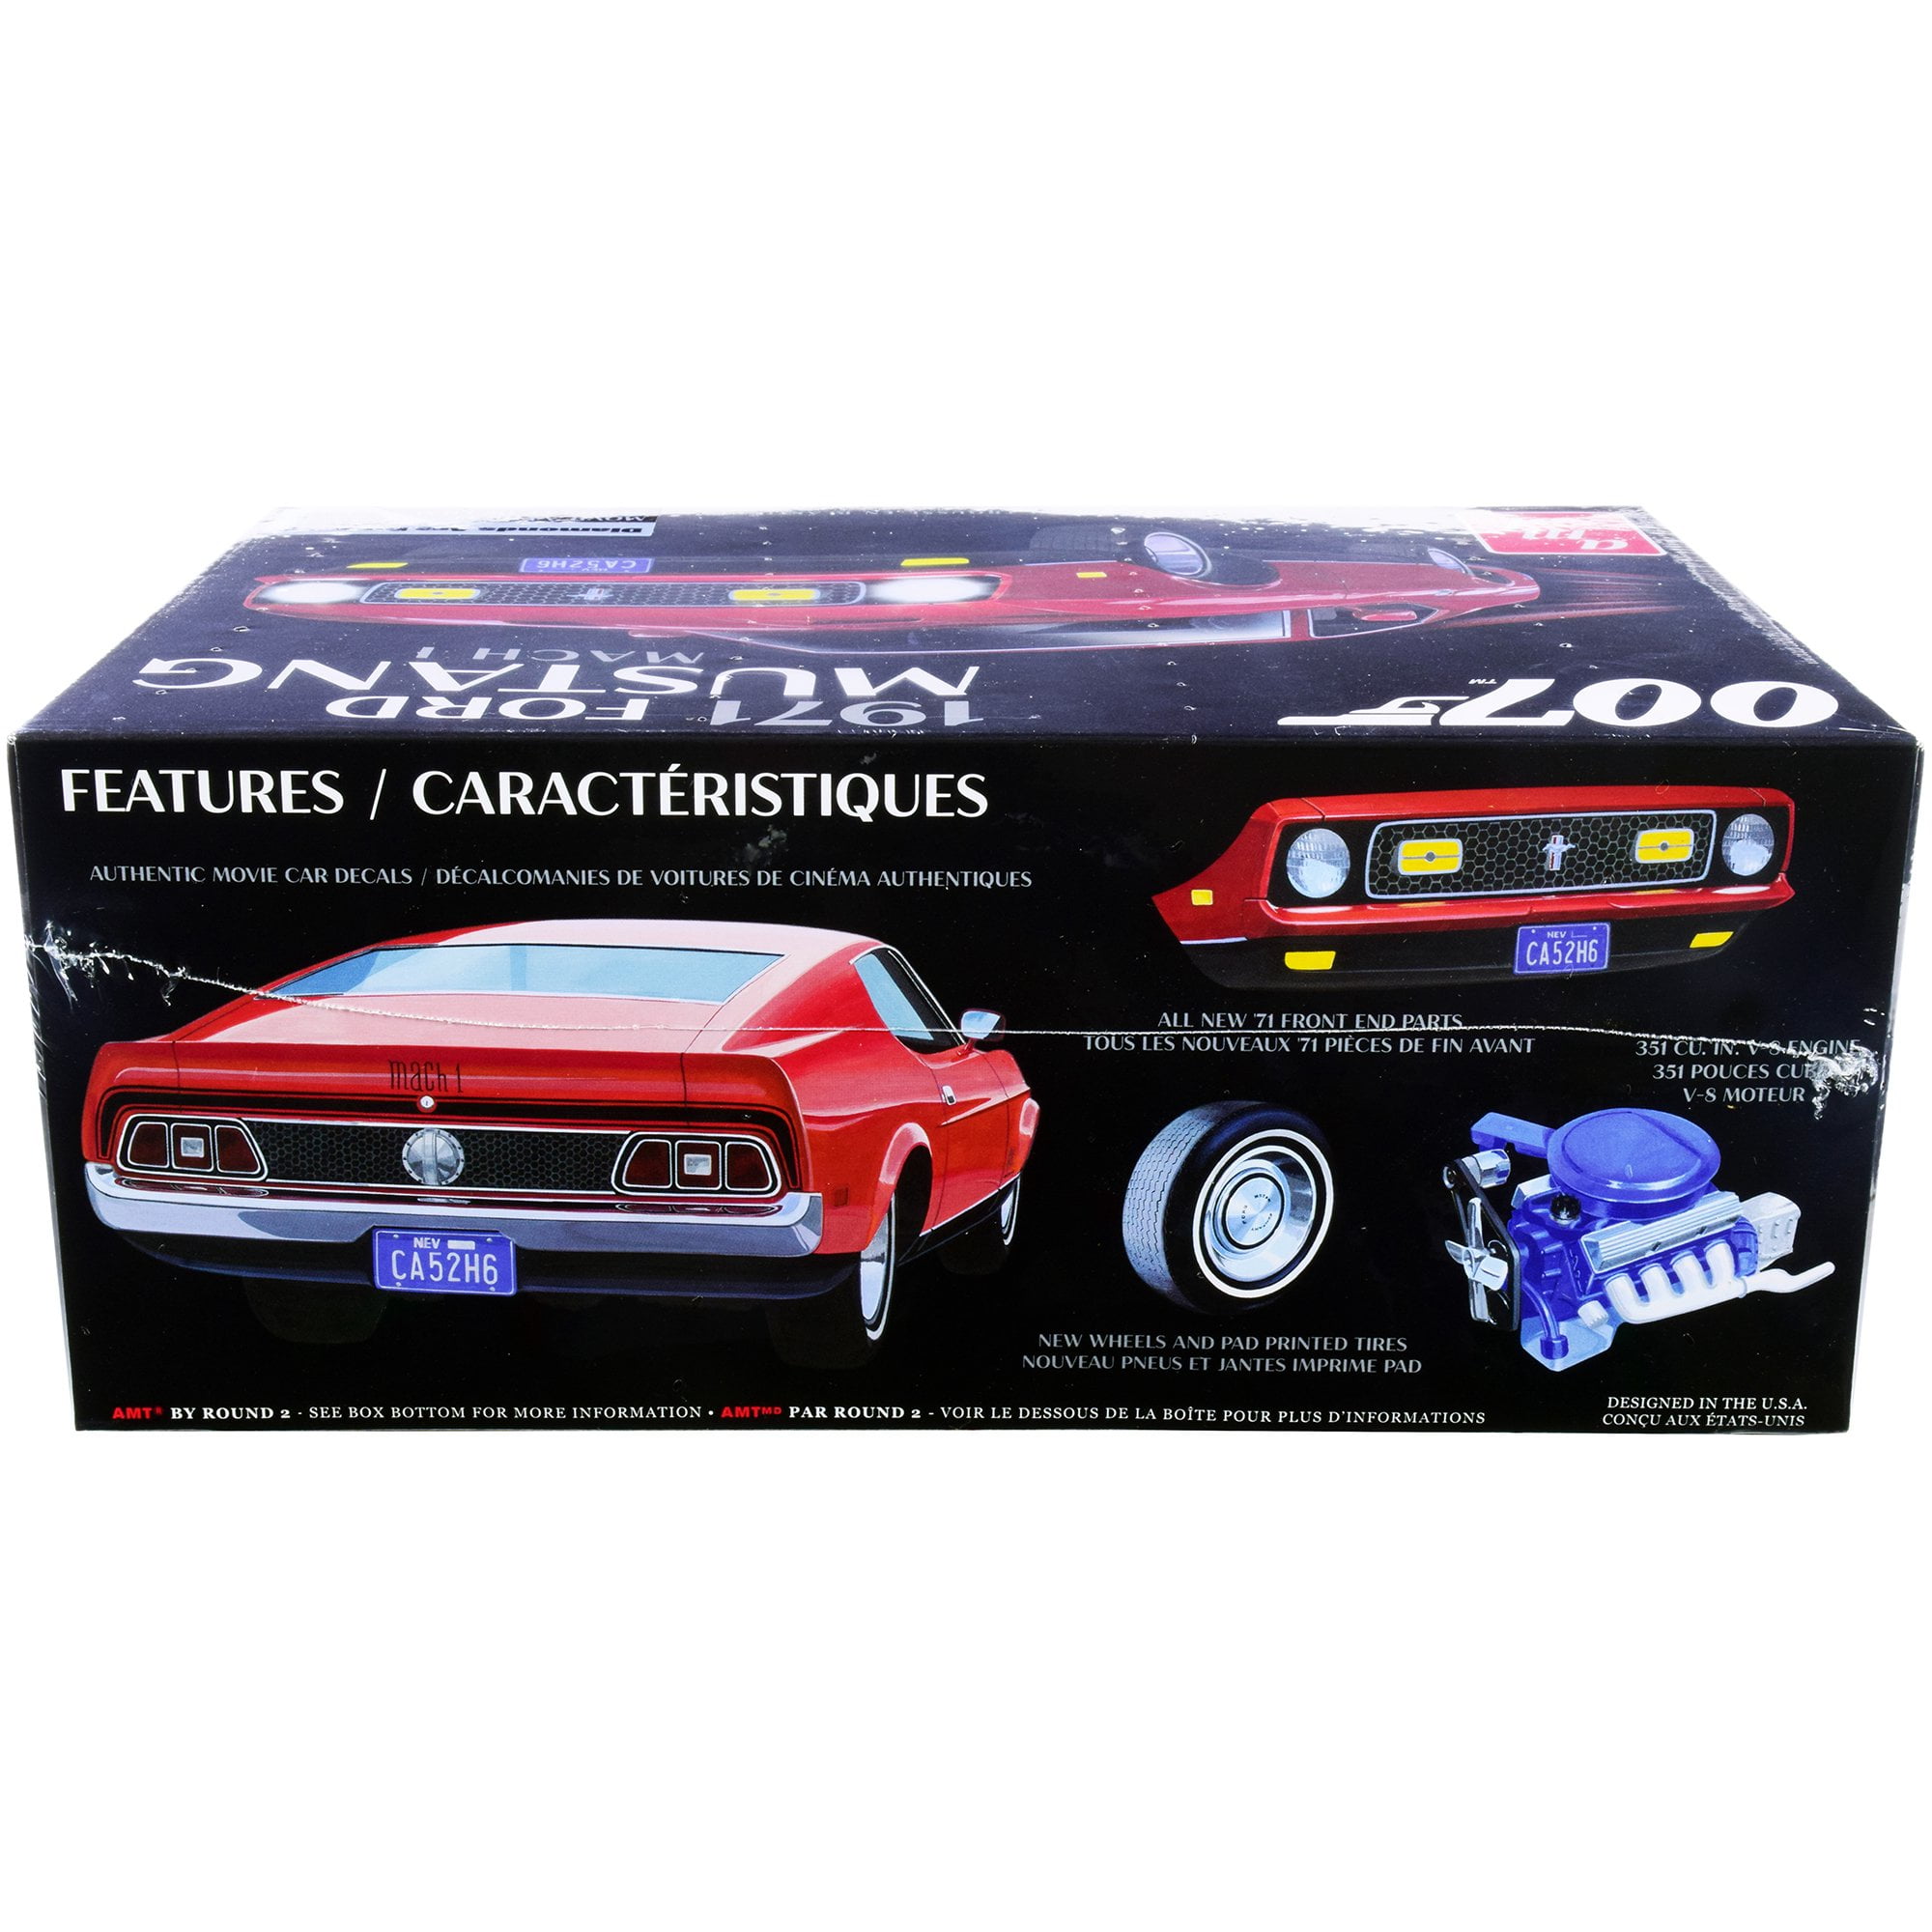 Amt® Maquette Ford Mustang 1971 (Mach I) 007 1:25 - AMT1187